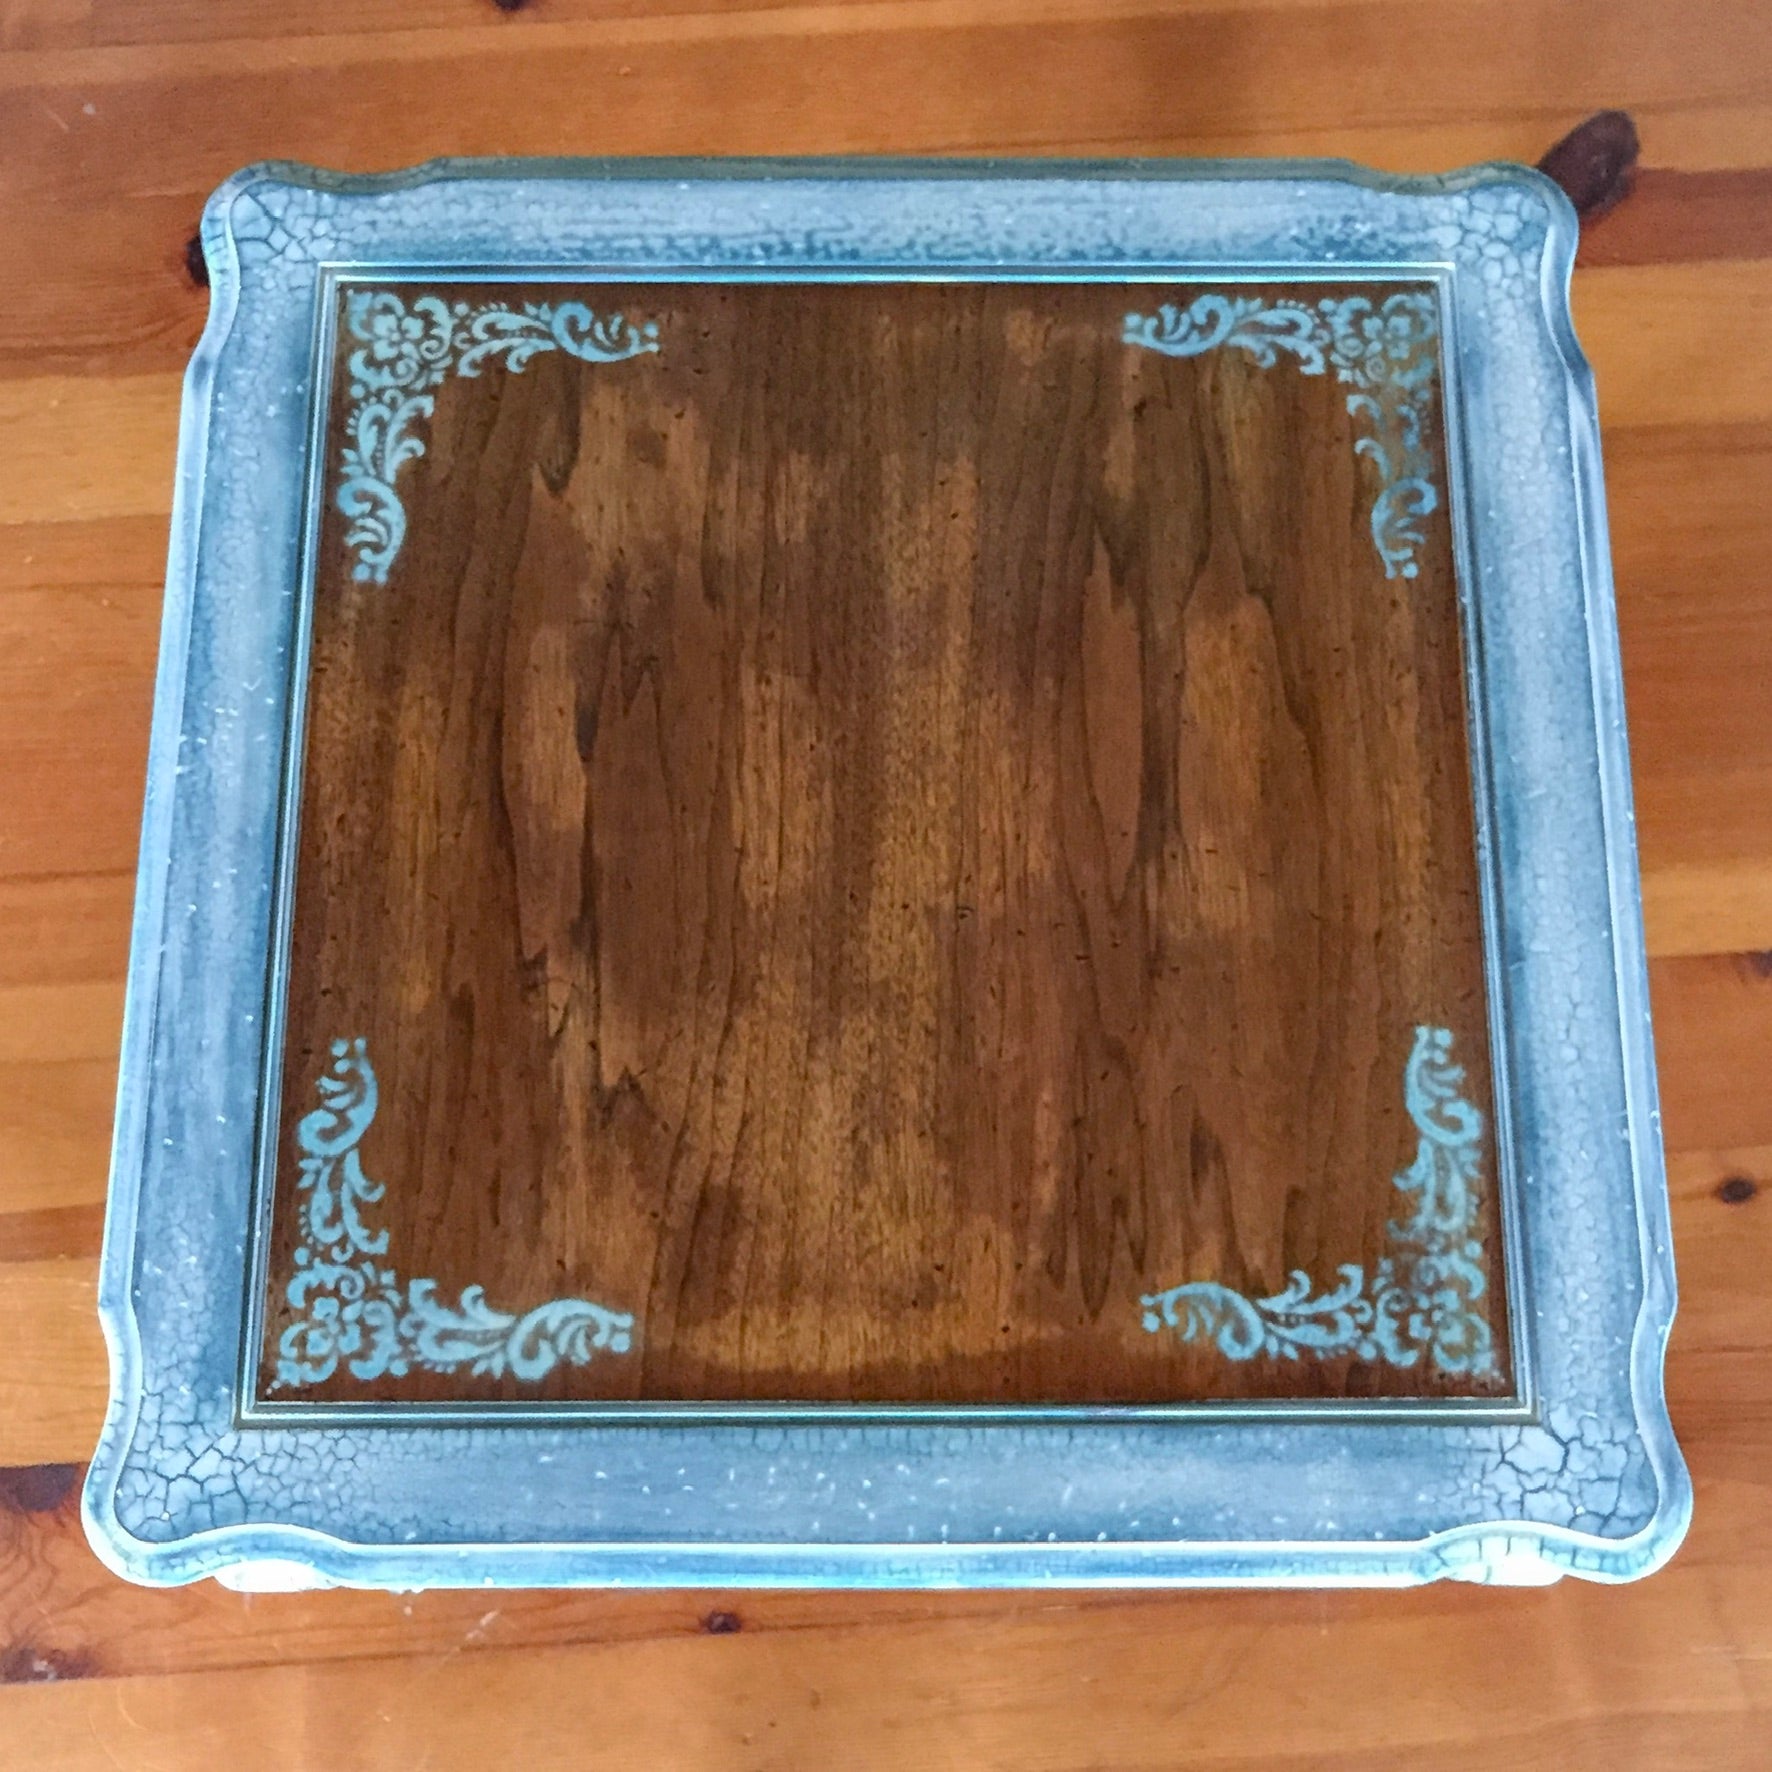 Birds eye view of the stained wood tabletop with damask accents at corners & distressed white trim.